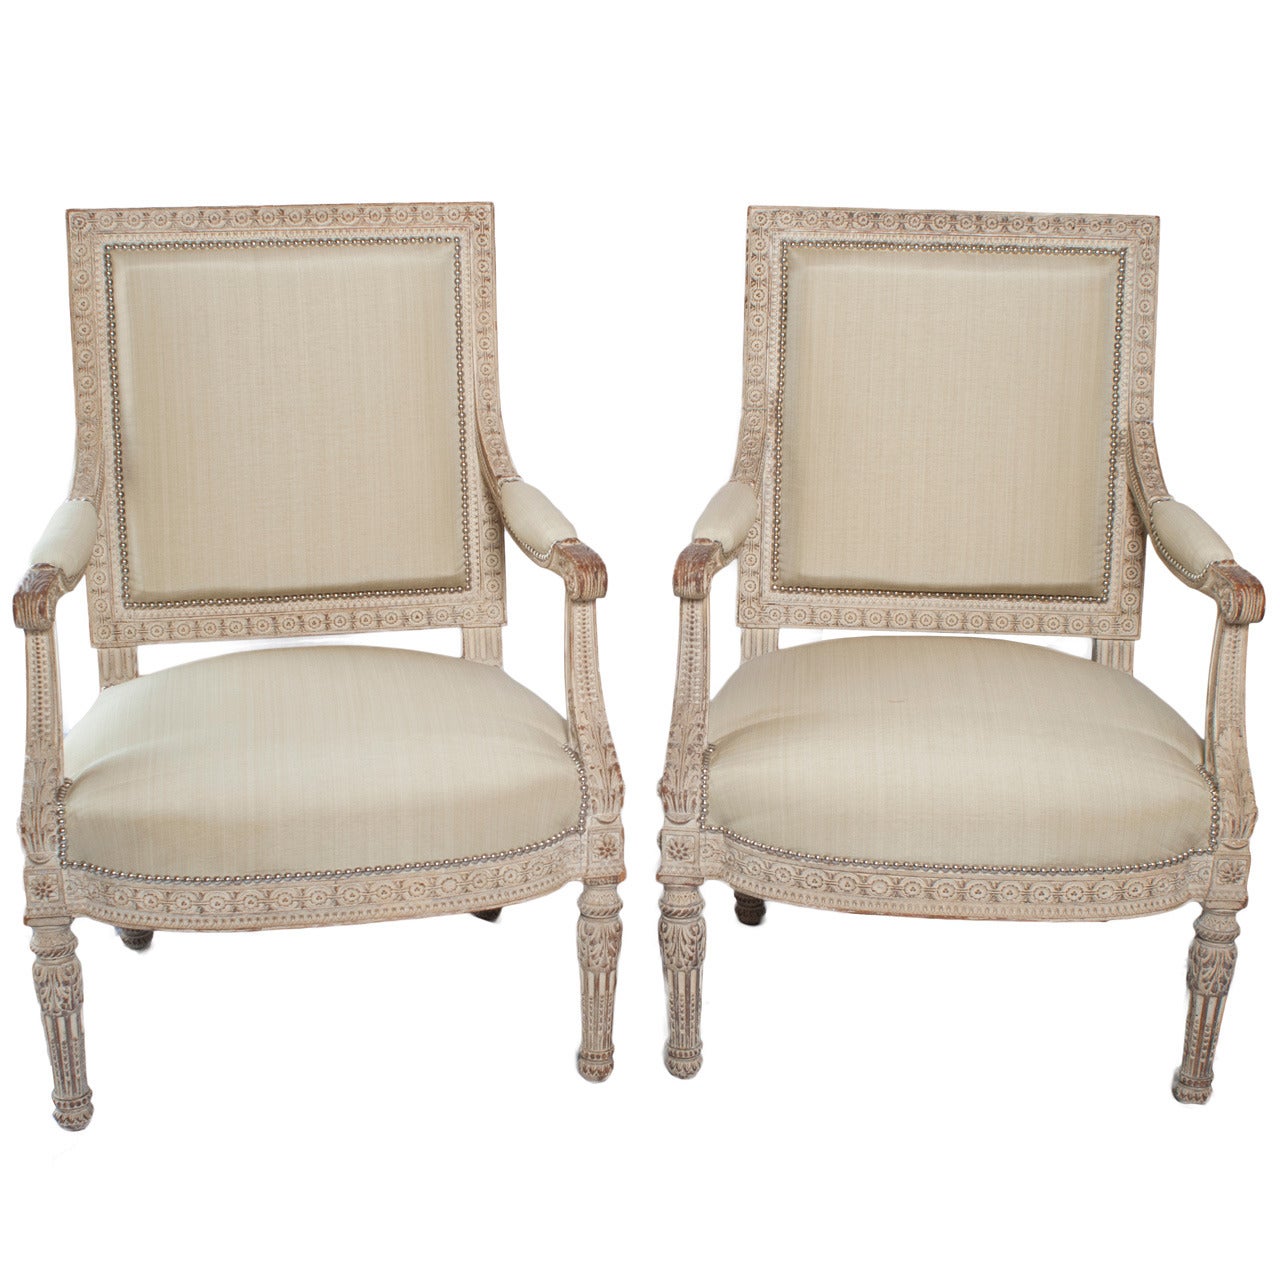 Pair of Unusual Large Square Back Louis XVI Style Fauteuils For Sale